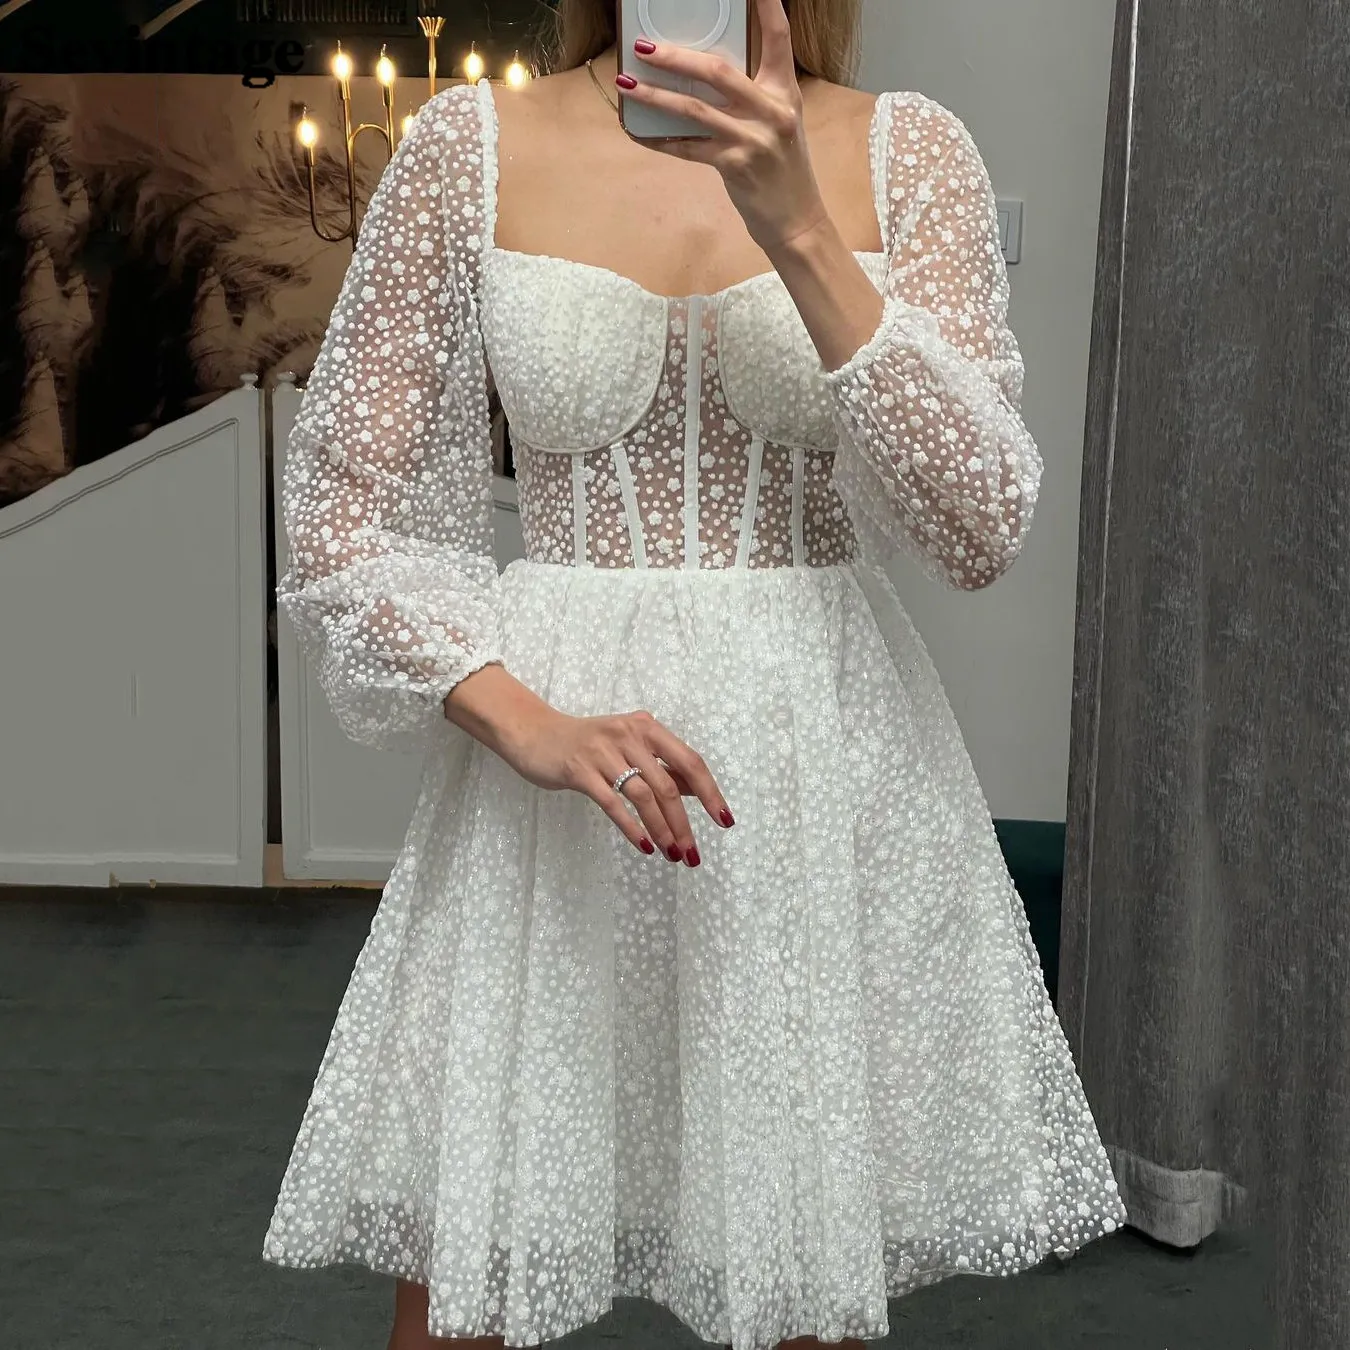 

Sevintage Ivory Above Knee Mini Prom Dresses Long Sleeves See Through Top A Line Tulle Formal Cocktail Dress Women Party Gowns